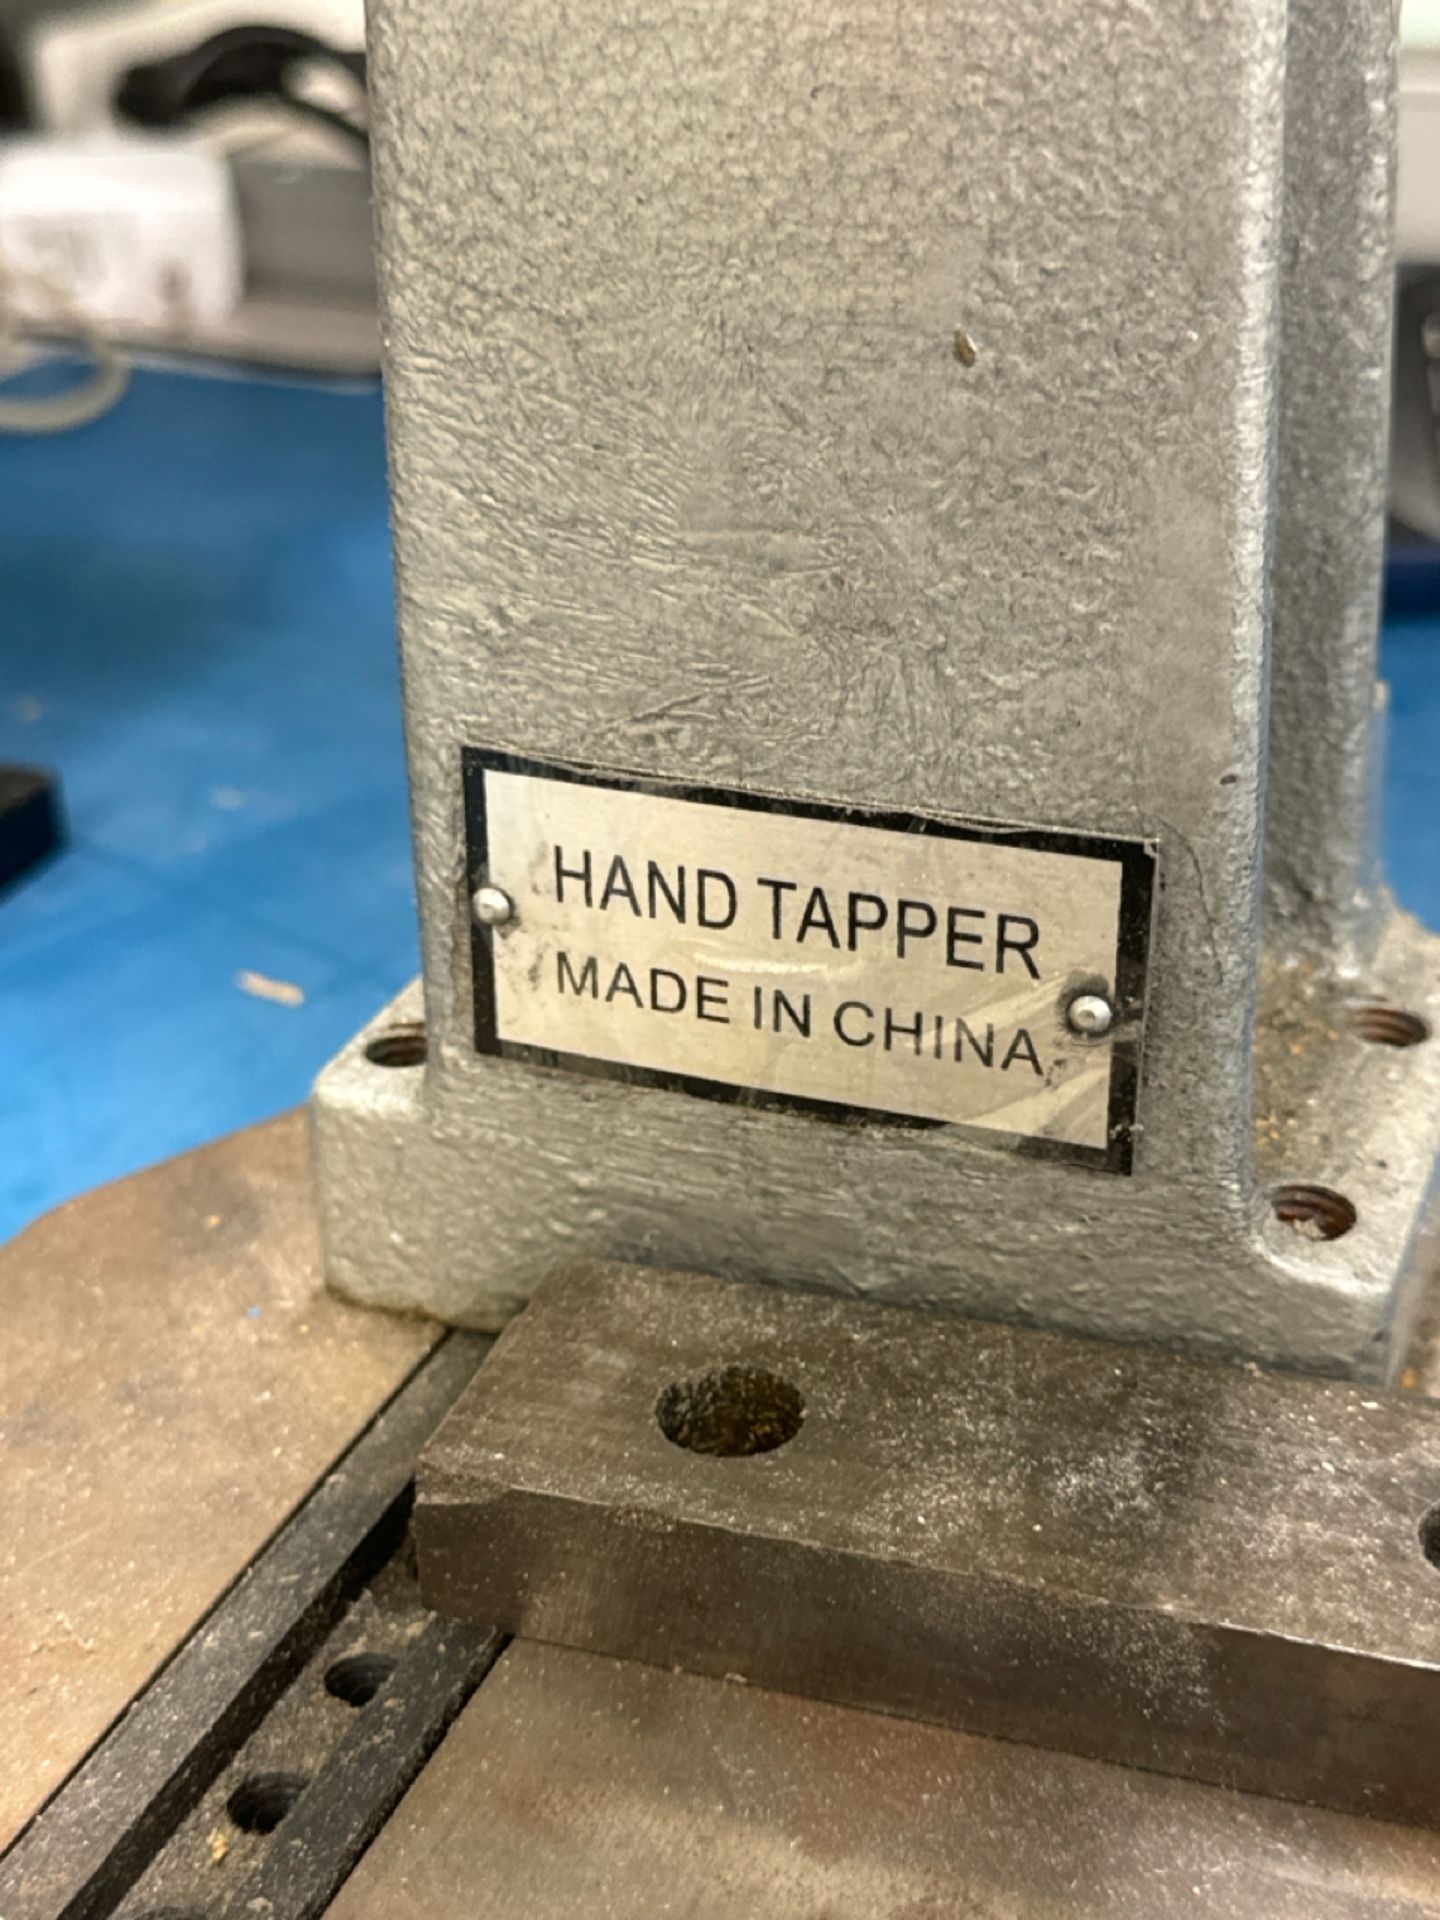 Hand Tapper - Image 2 of 3